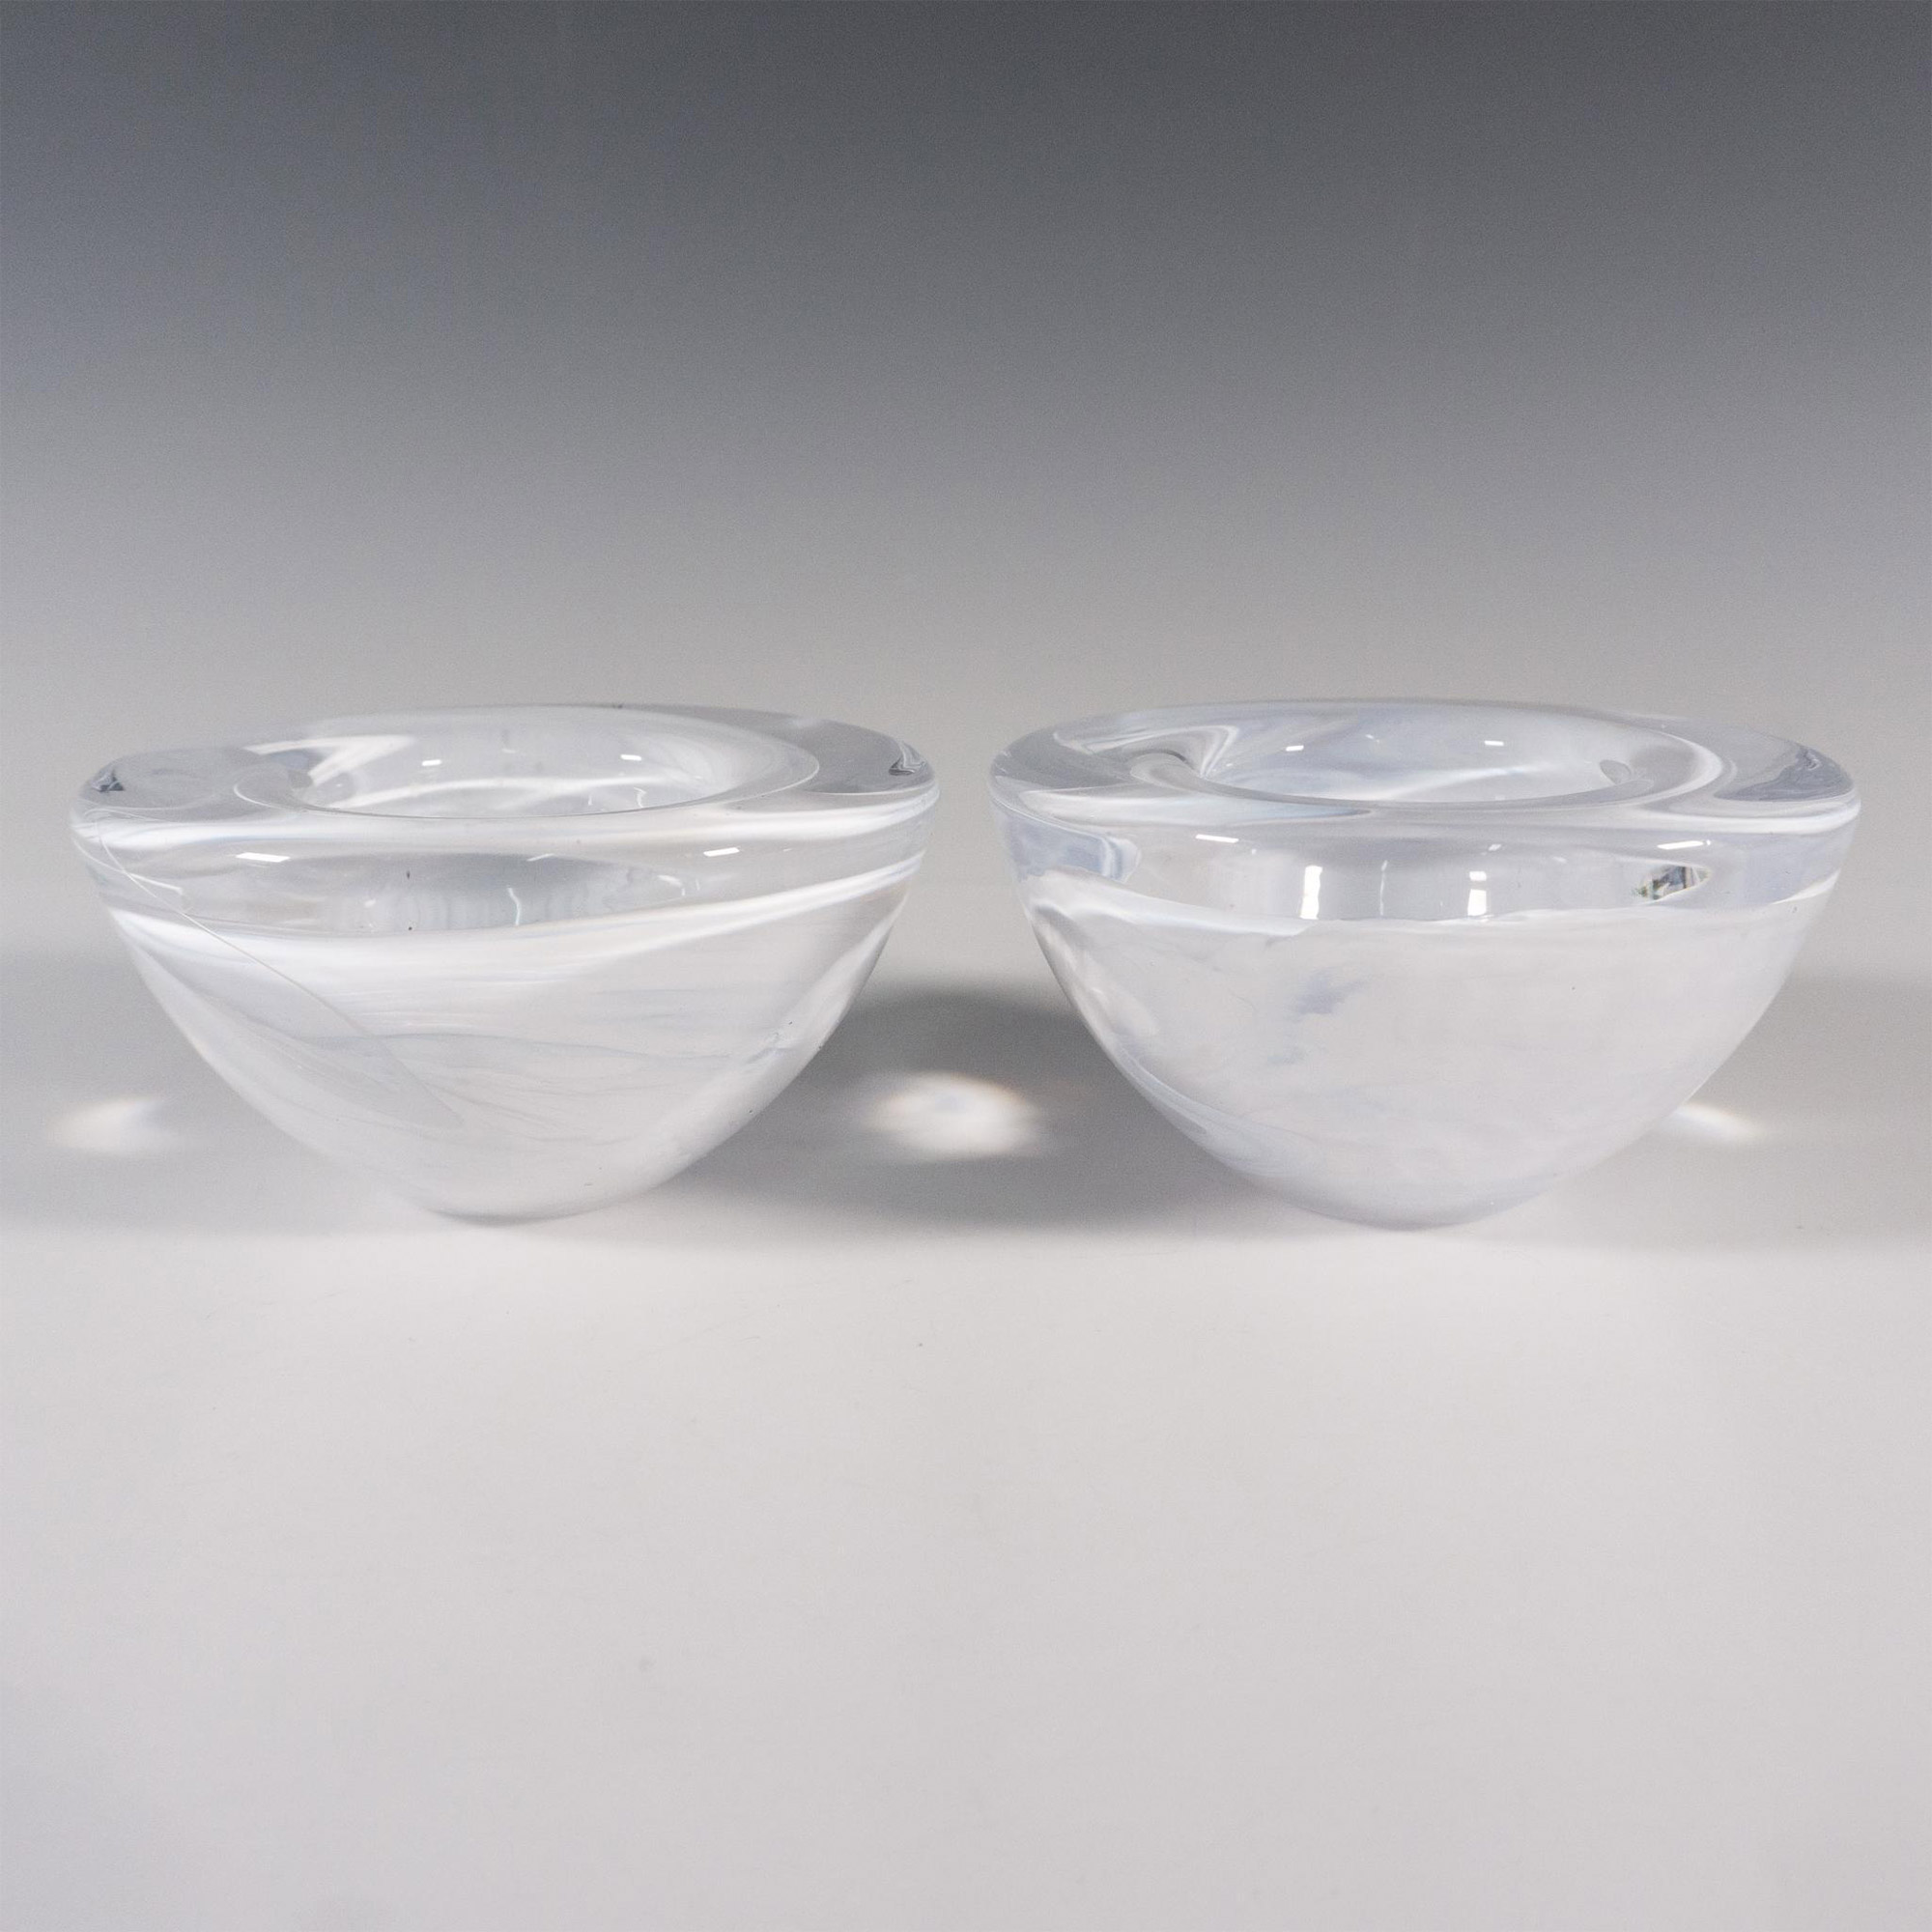 Pair of Kosta Boda by Anna Ehrner Candle Holders, Atoll - Image 2 of 4